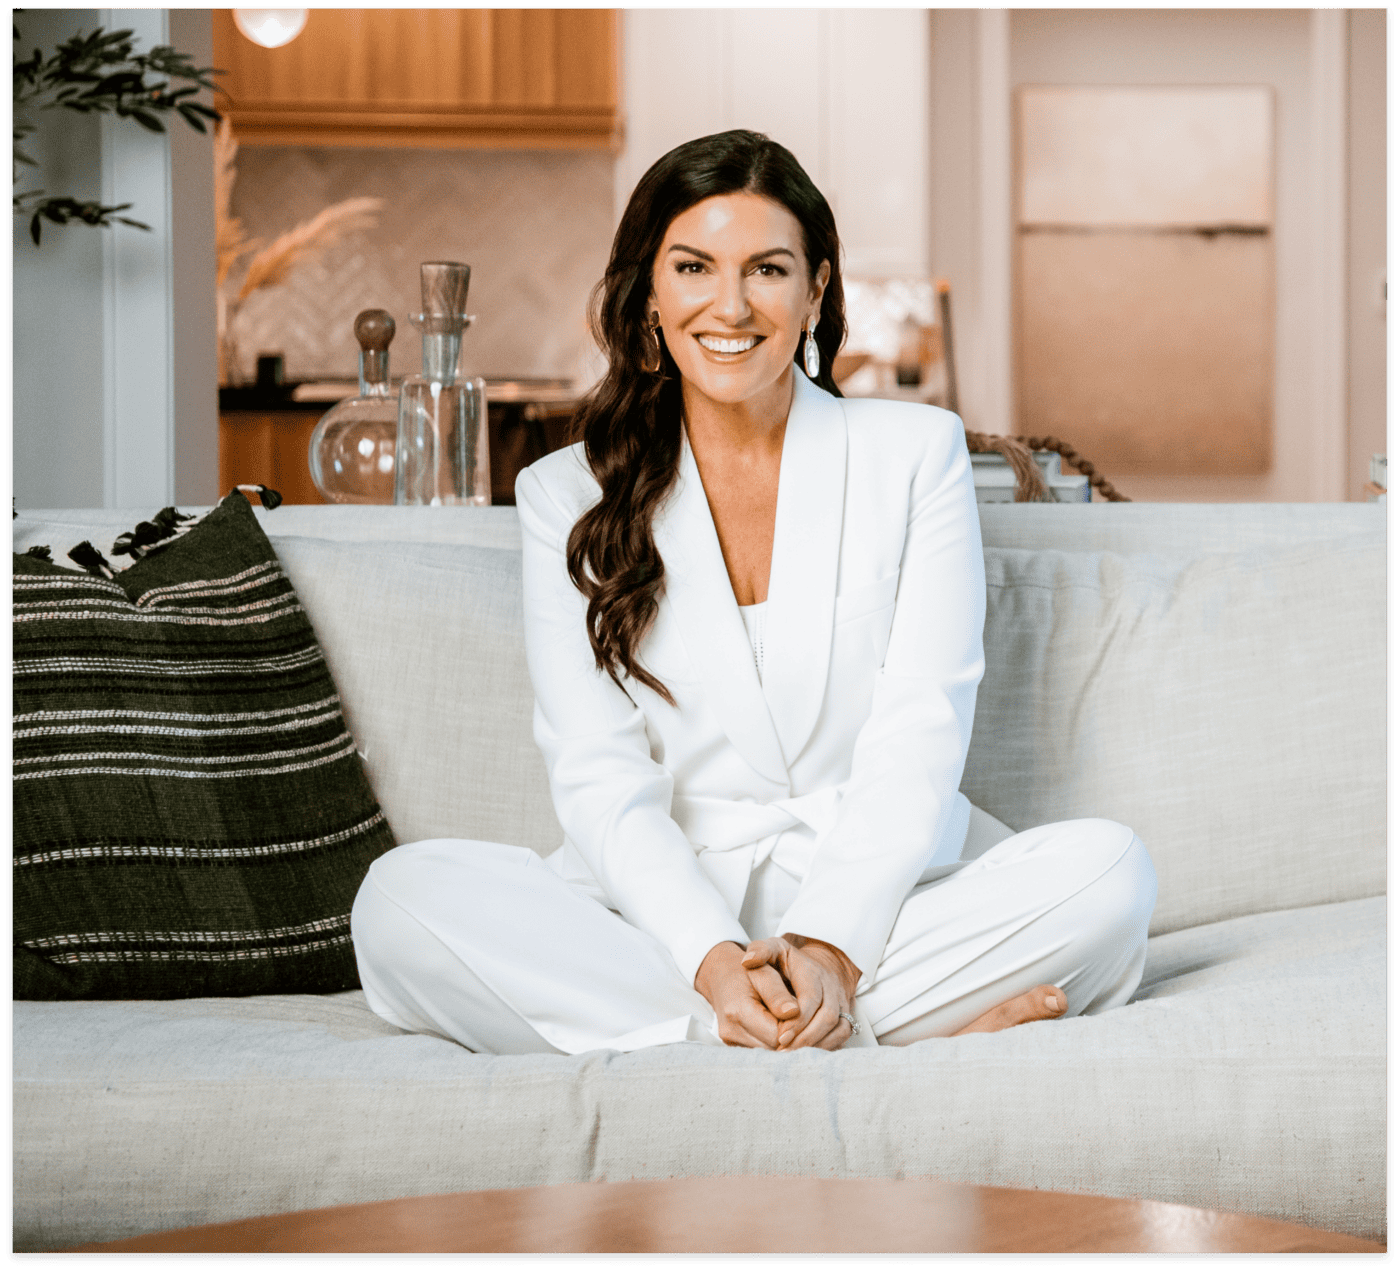 Amy Porterfield wearing white suit sitting on a coach